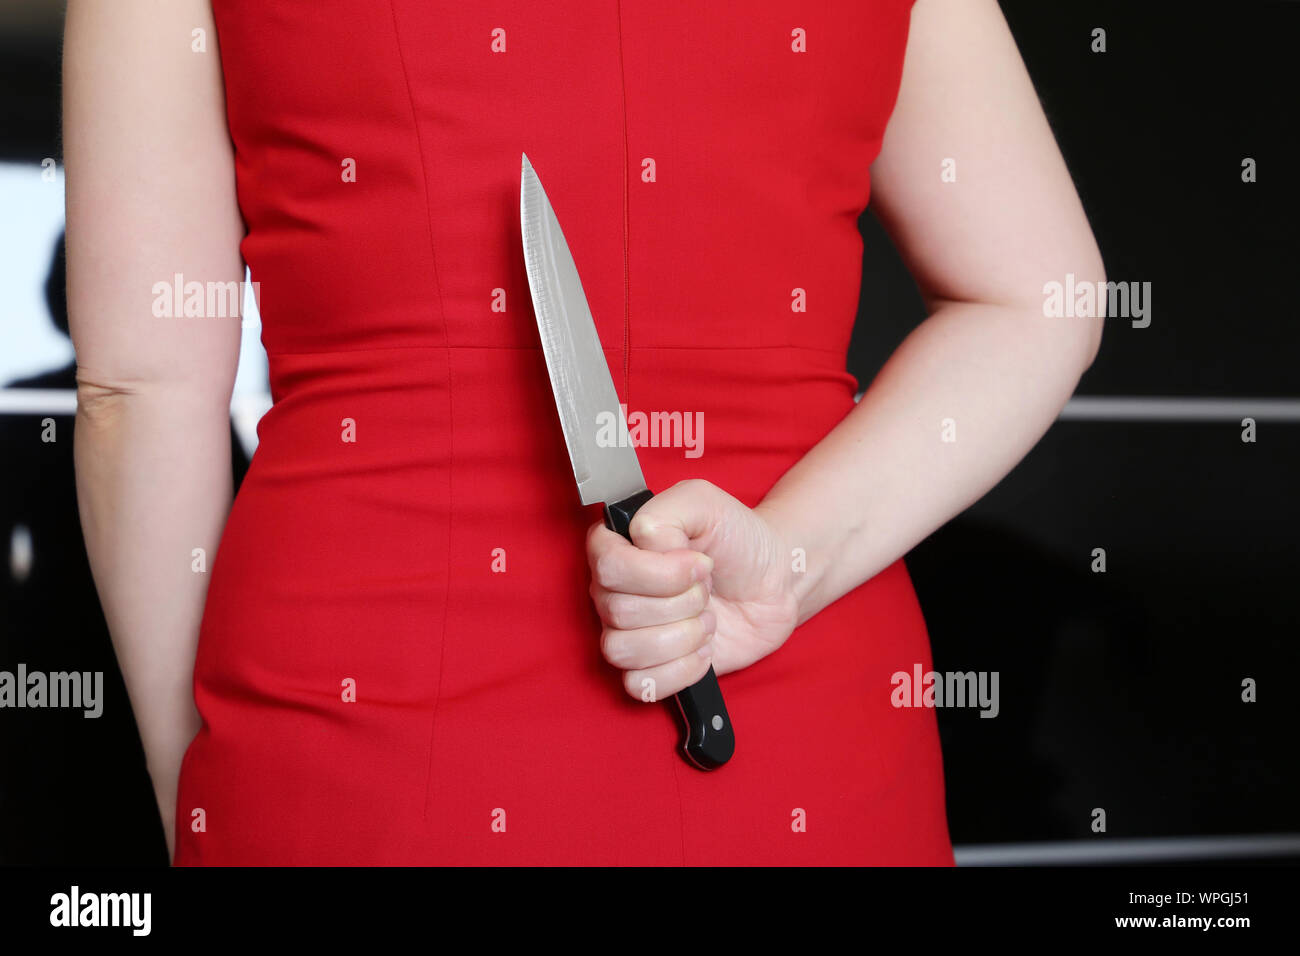 Woman in red dress standing with a knife in hand behind her back. Concept of crime, self defense, murder, maniac, revenge Stock Photo